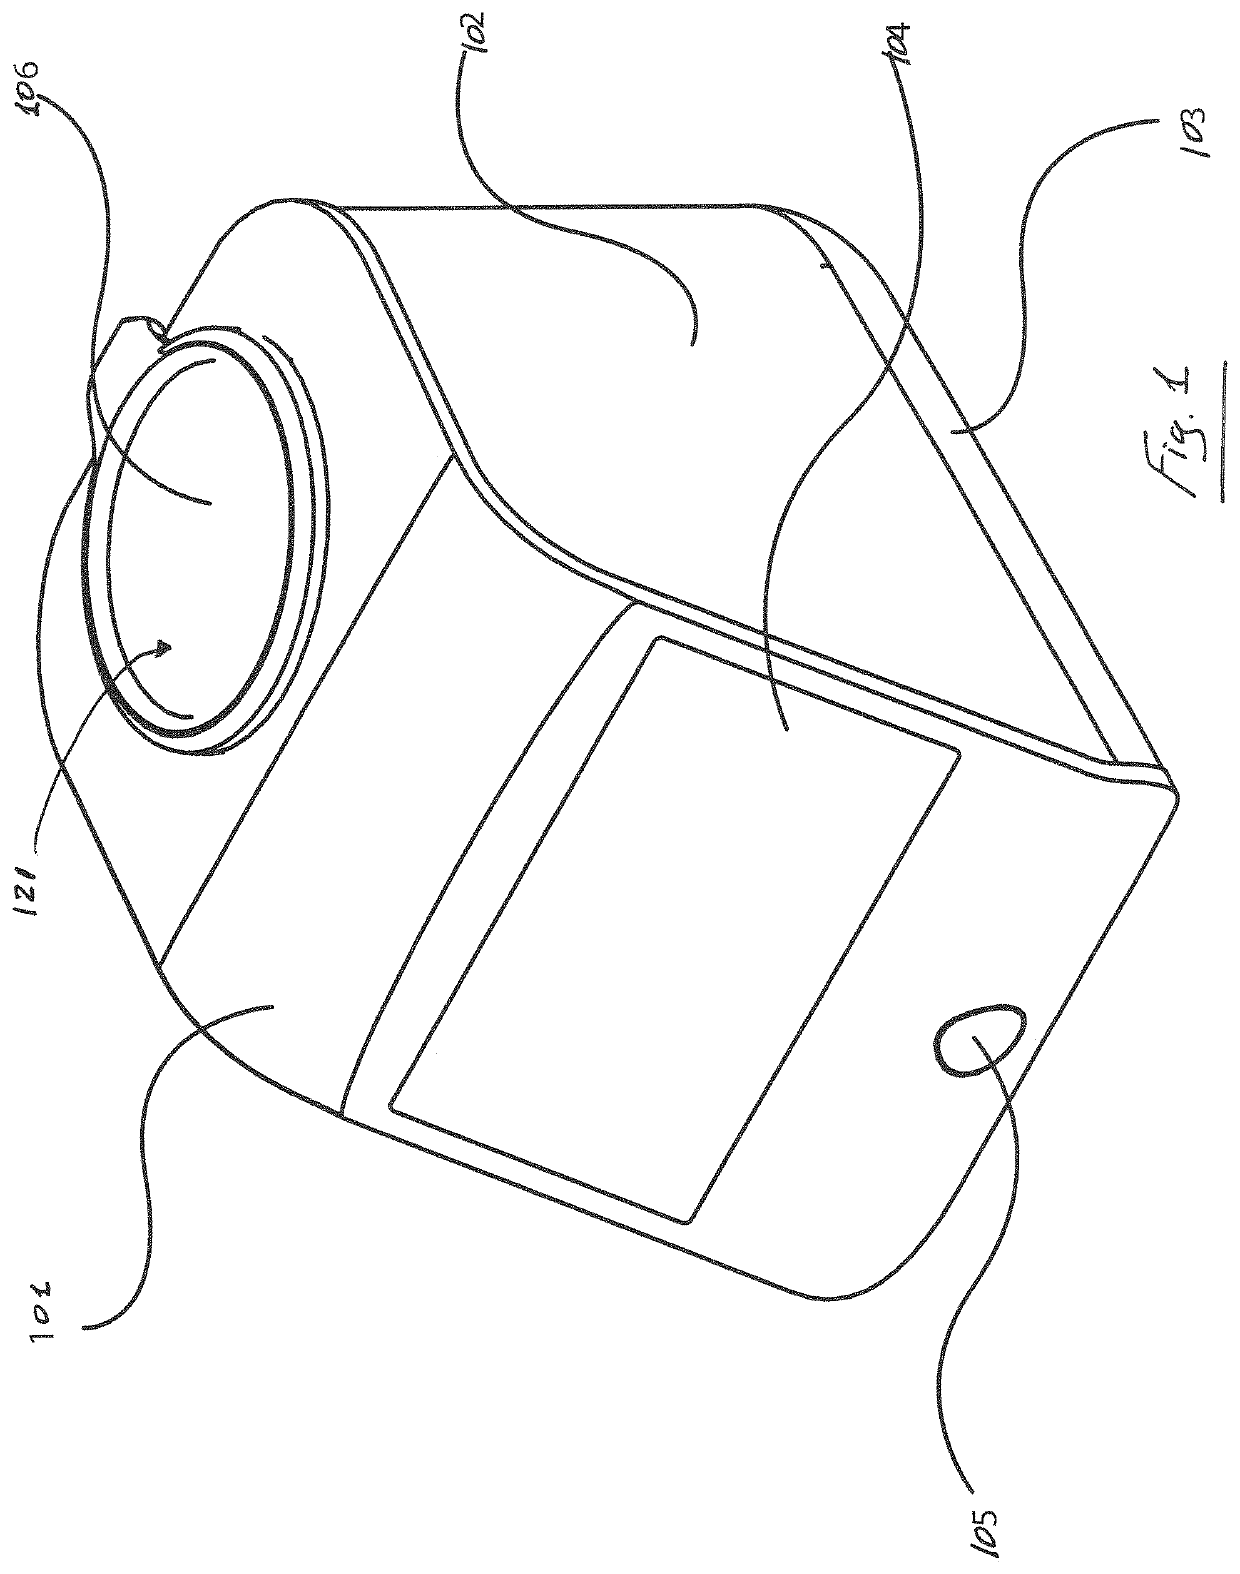 Docking station for an enteral feeding device